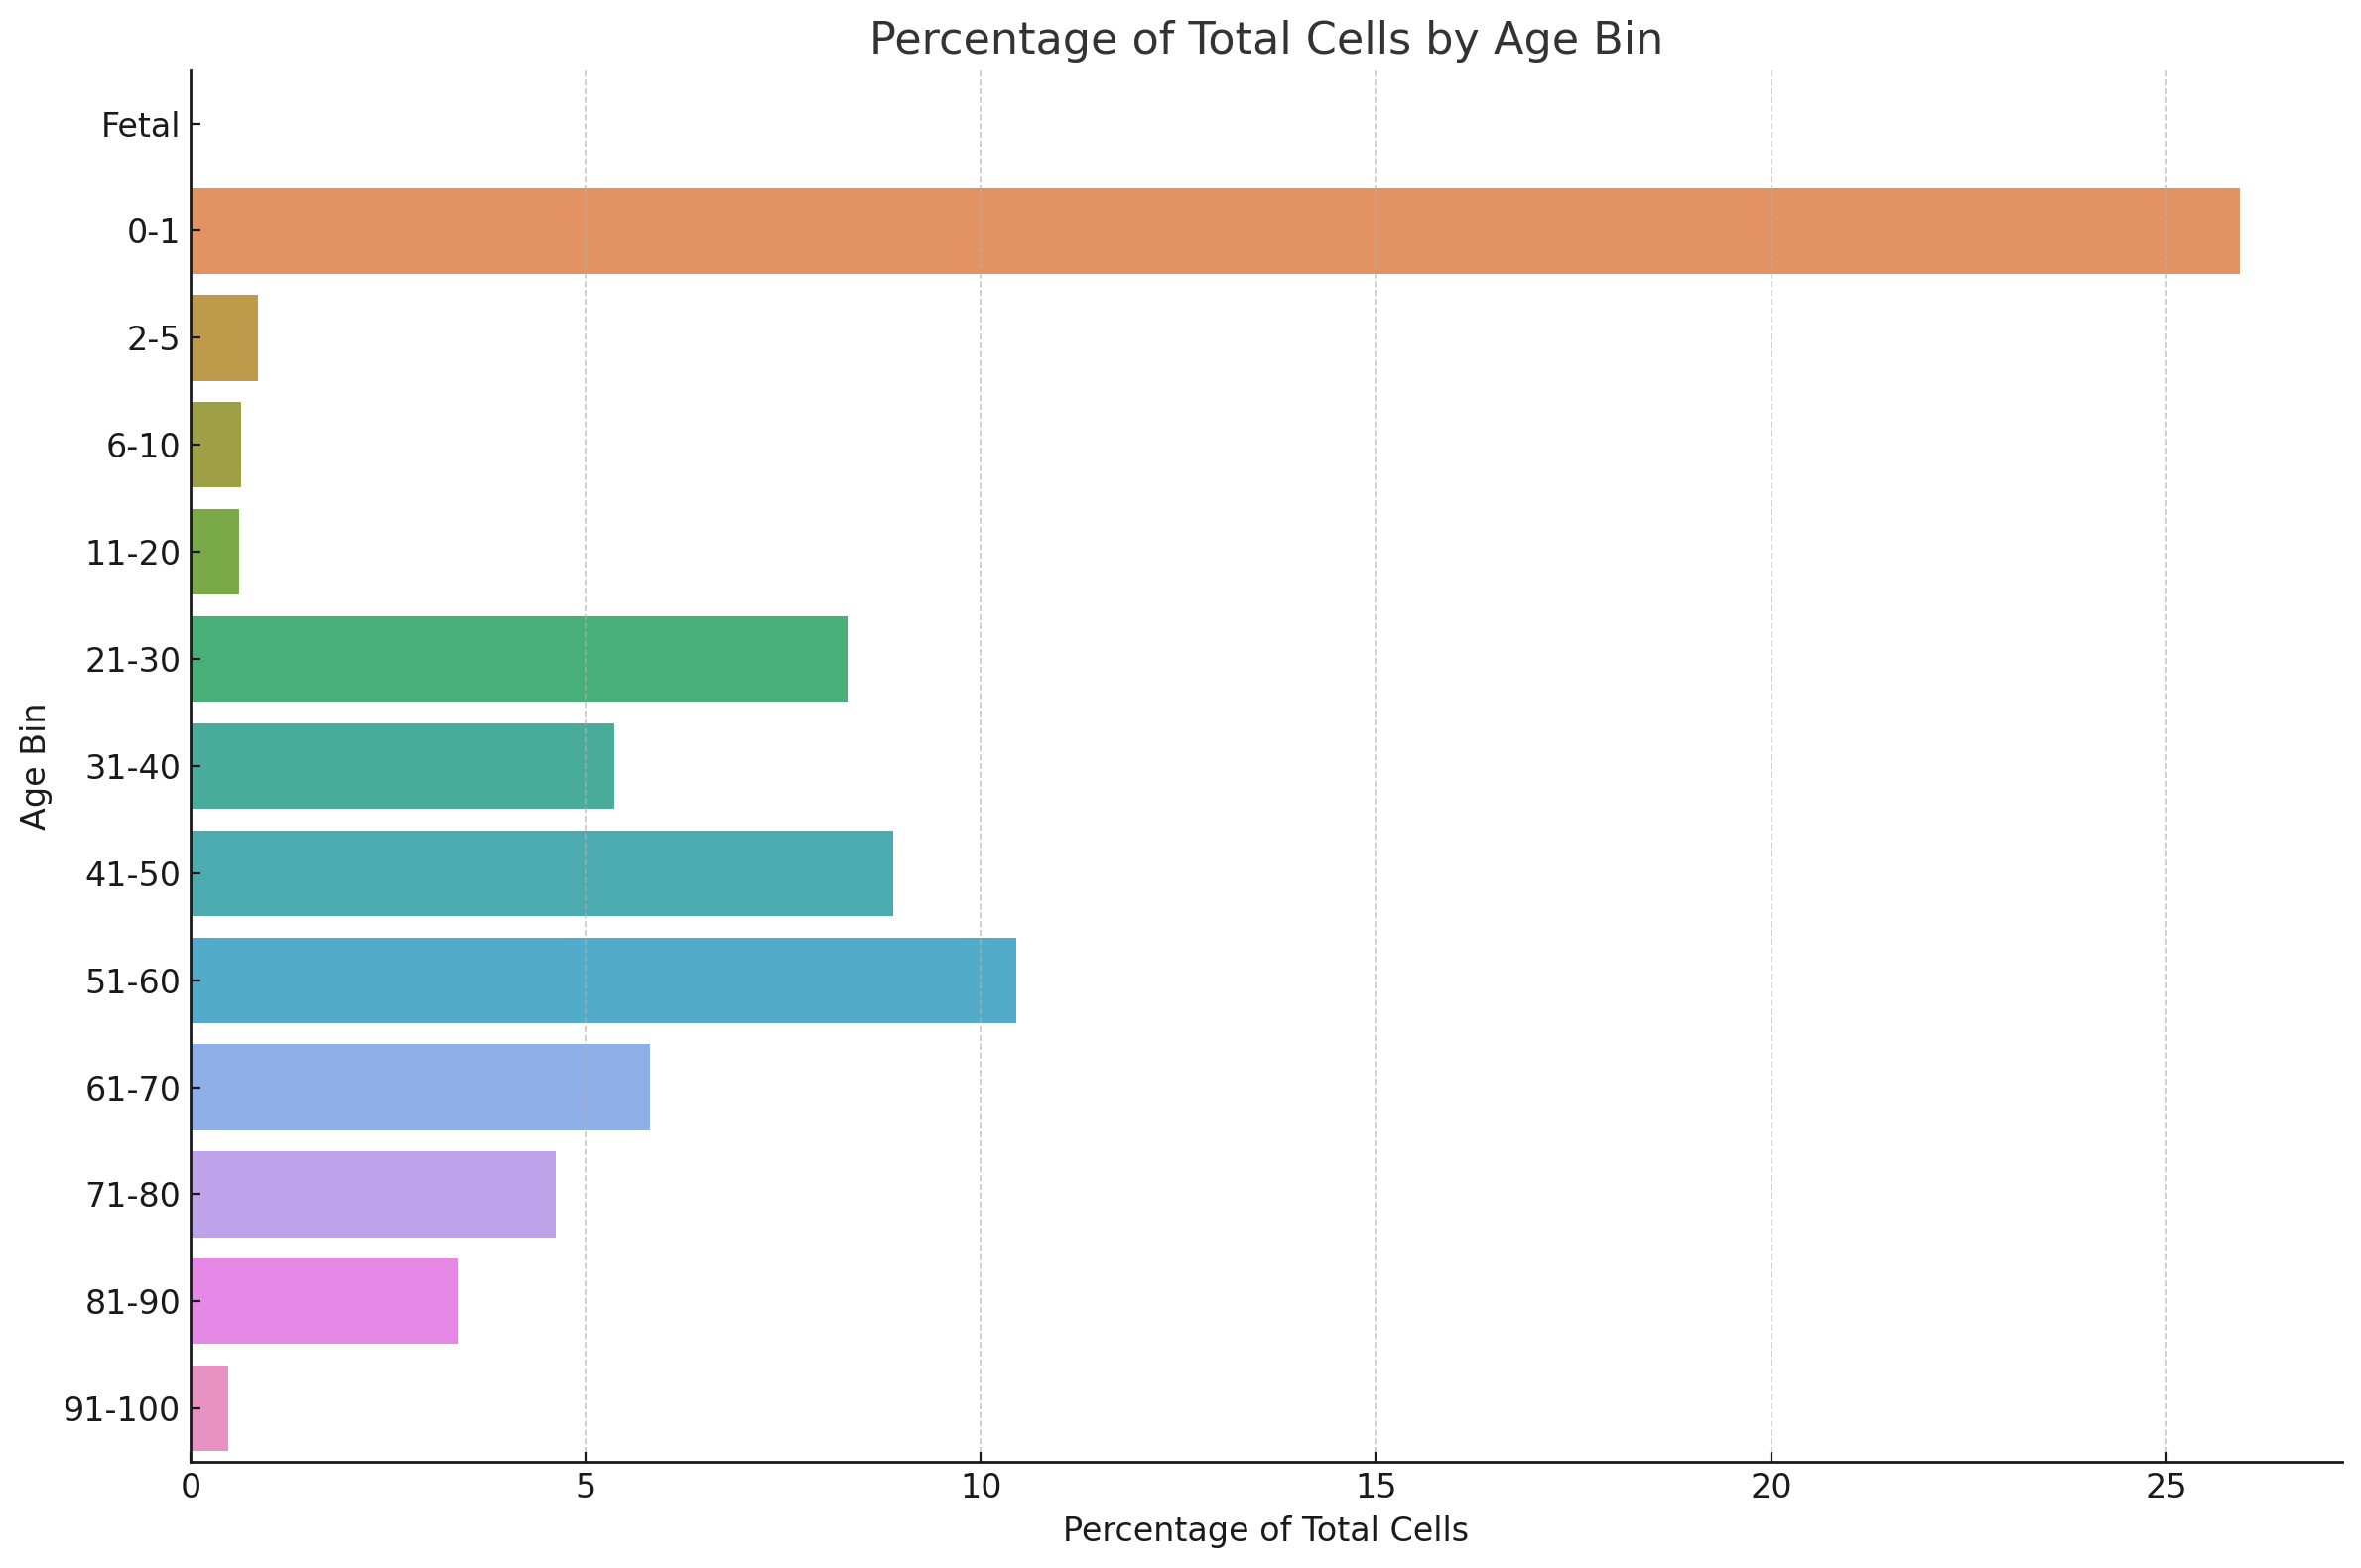 Percentage of cells by age